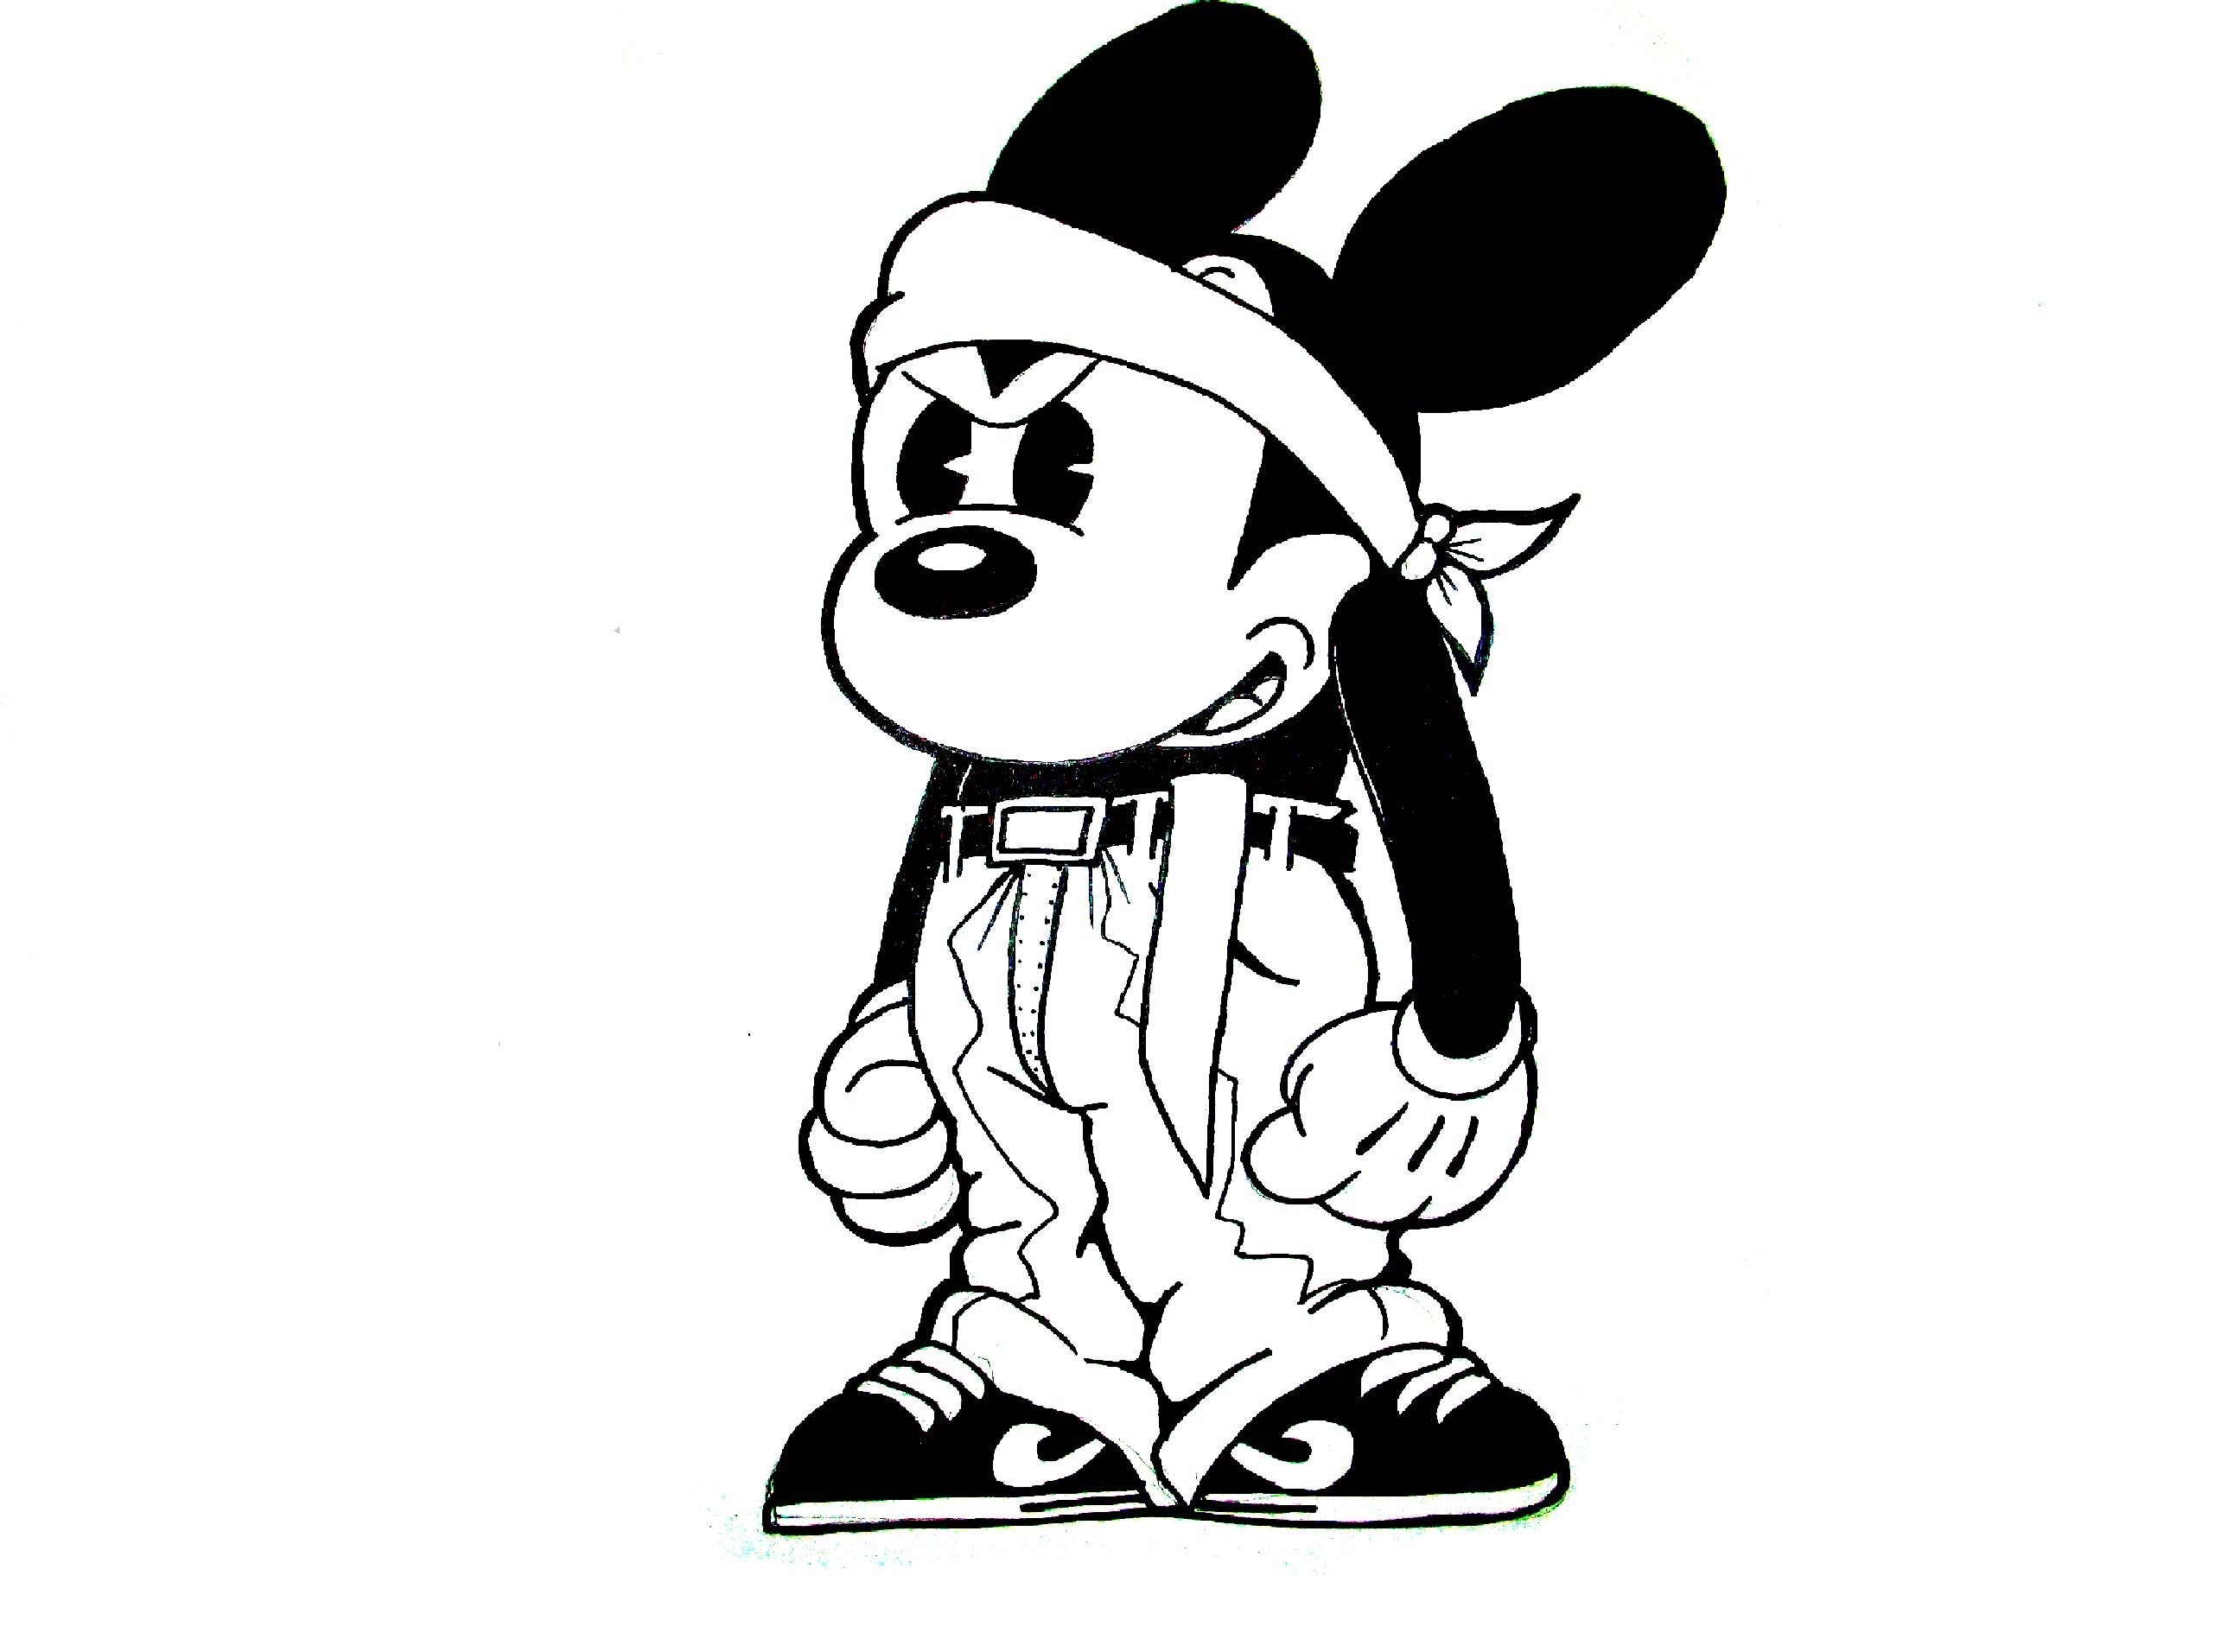 Speed Drawing - disney character - mickey mouse - YouTube